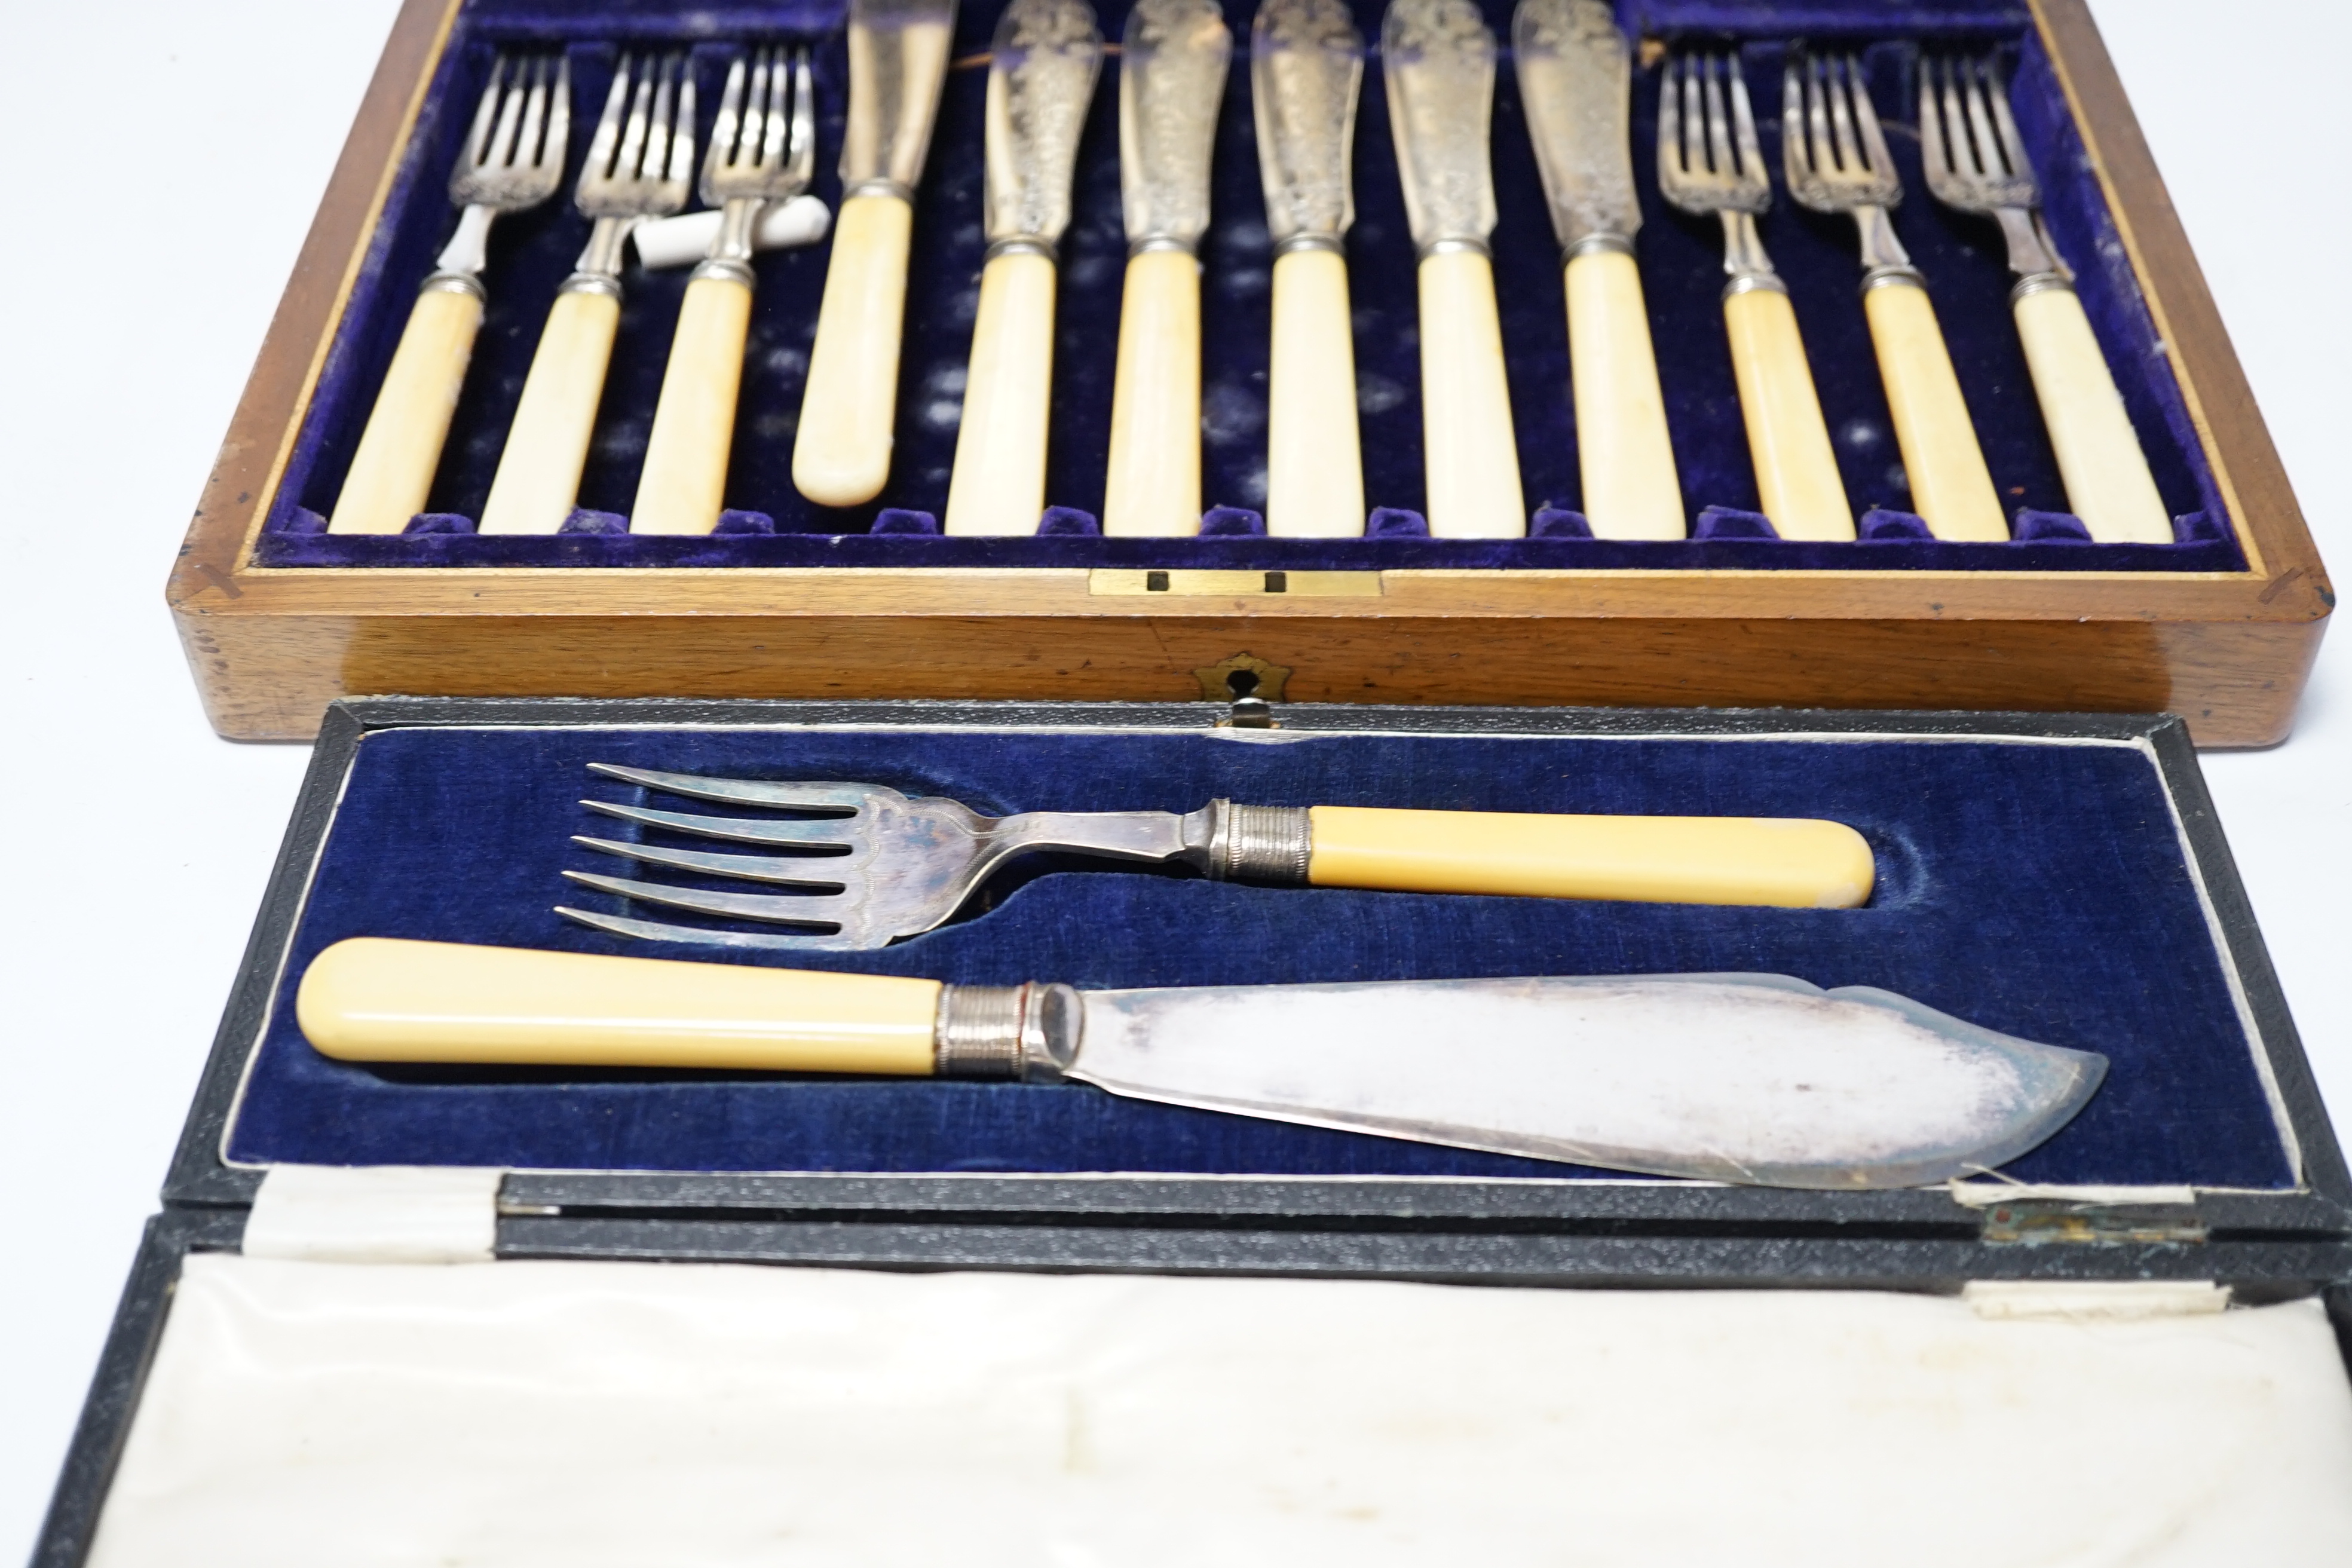 A set of twelve plated engraved fish knives and forks, with bone handles, cased together with a pair of plated fish servers with ivorine handles